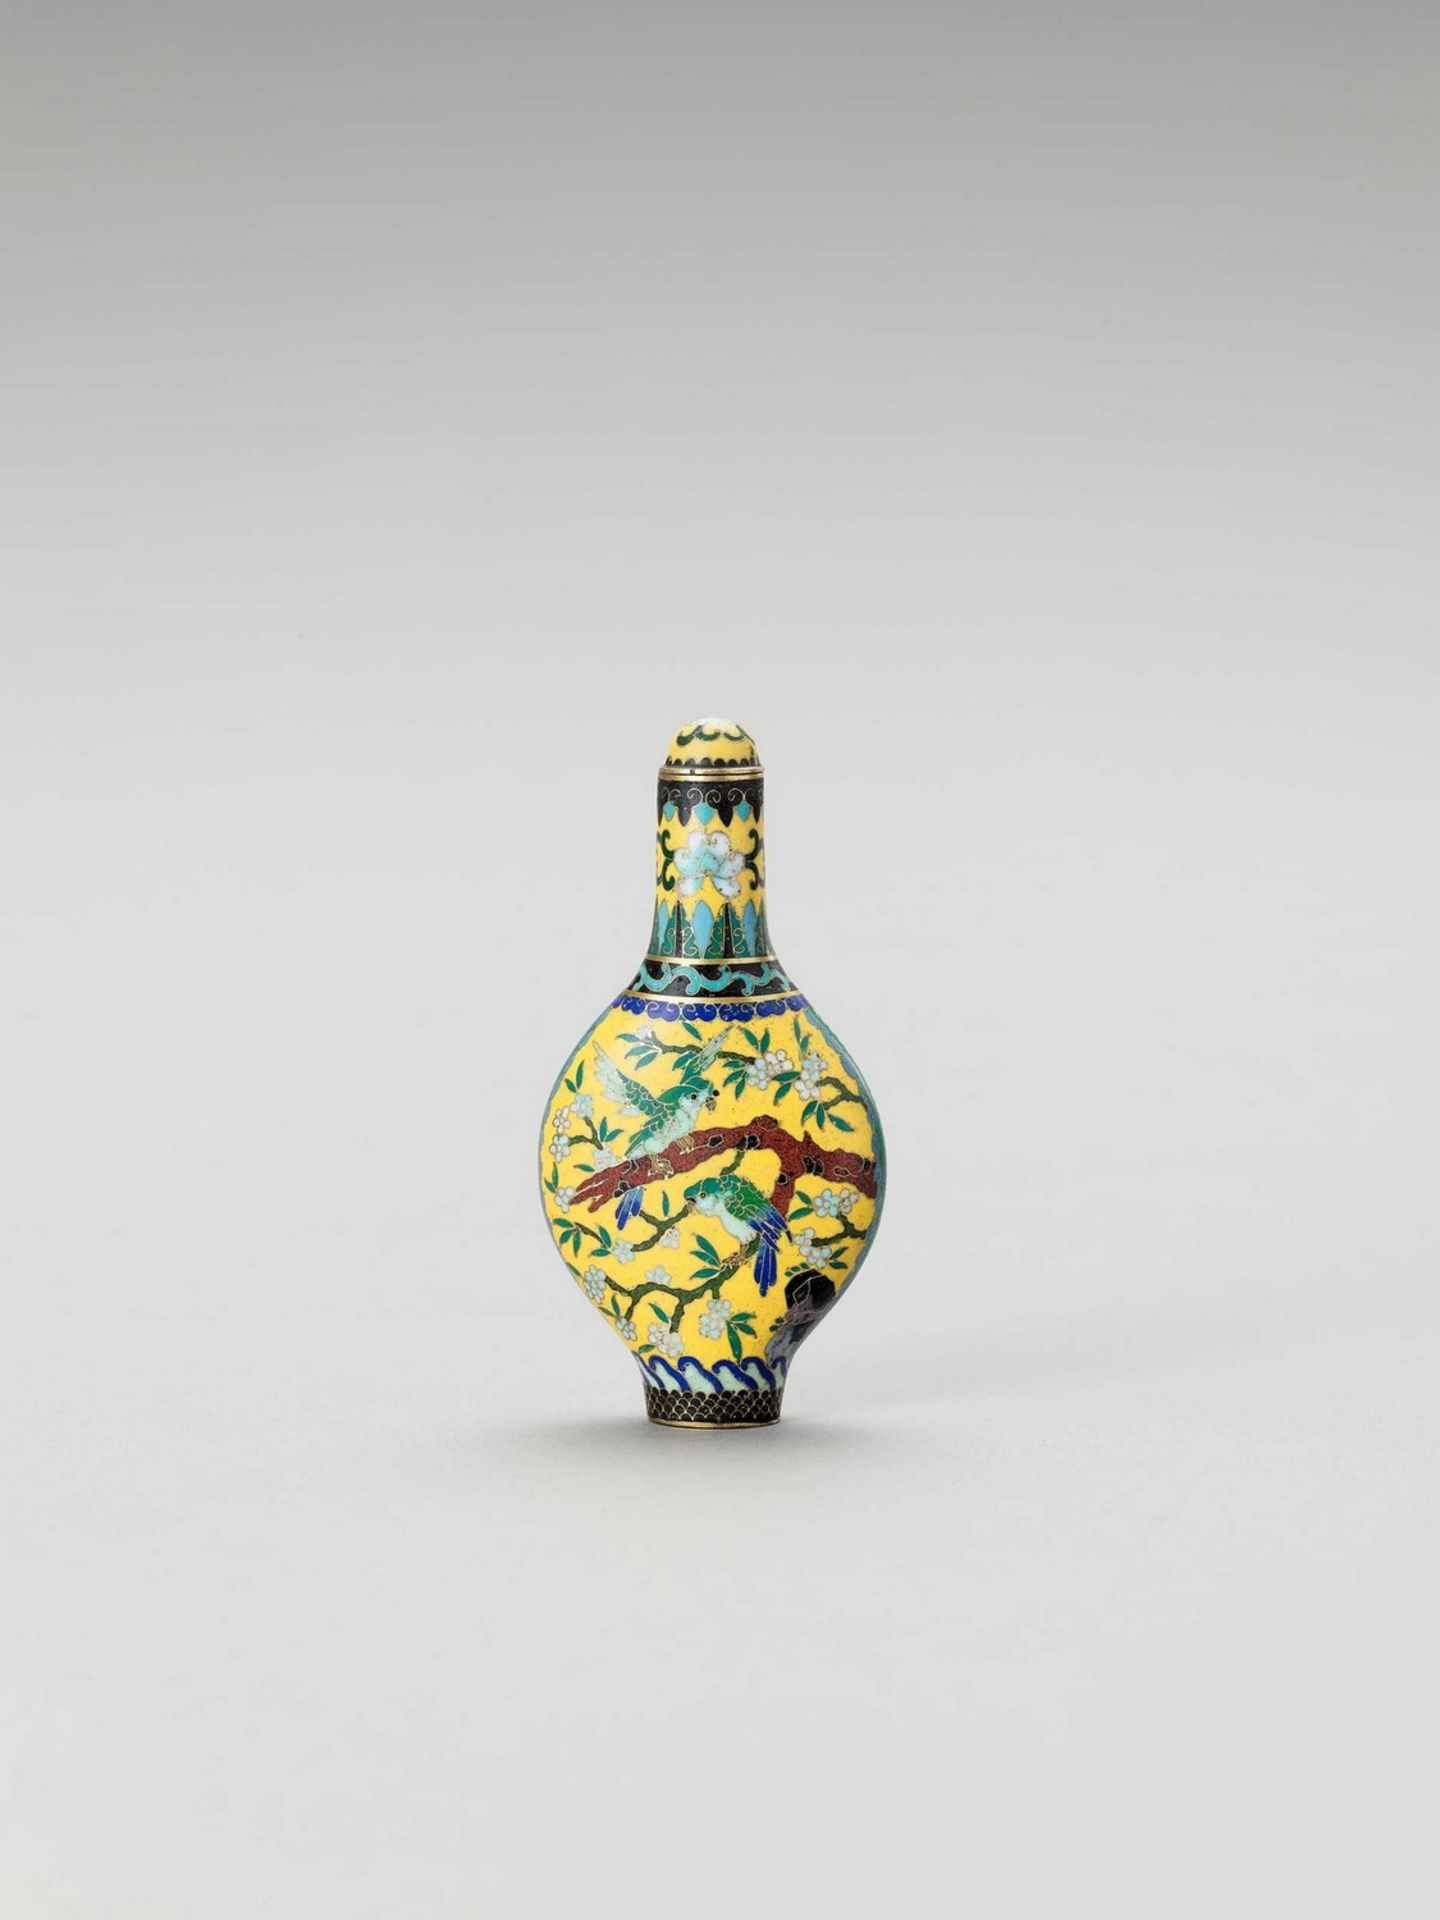 A CLOISONNE SNUFF BOTTLE WITH BIRDS - Image 3 of 7